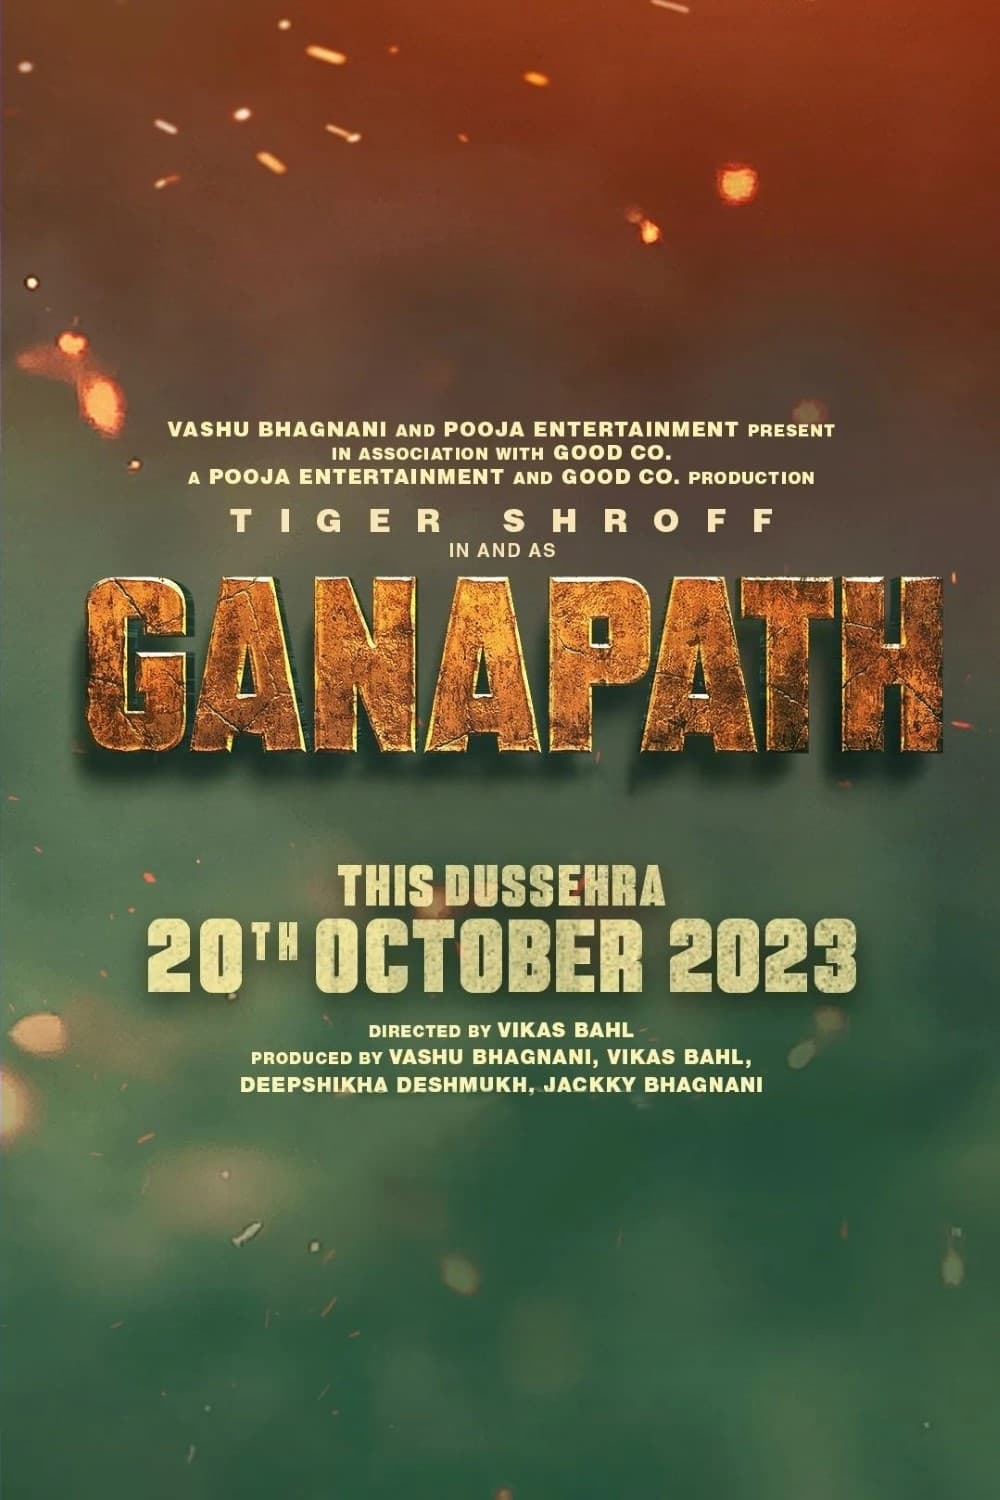 Poster for the movie "Ganapath"